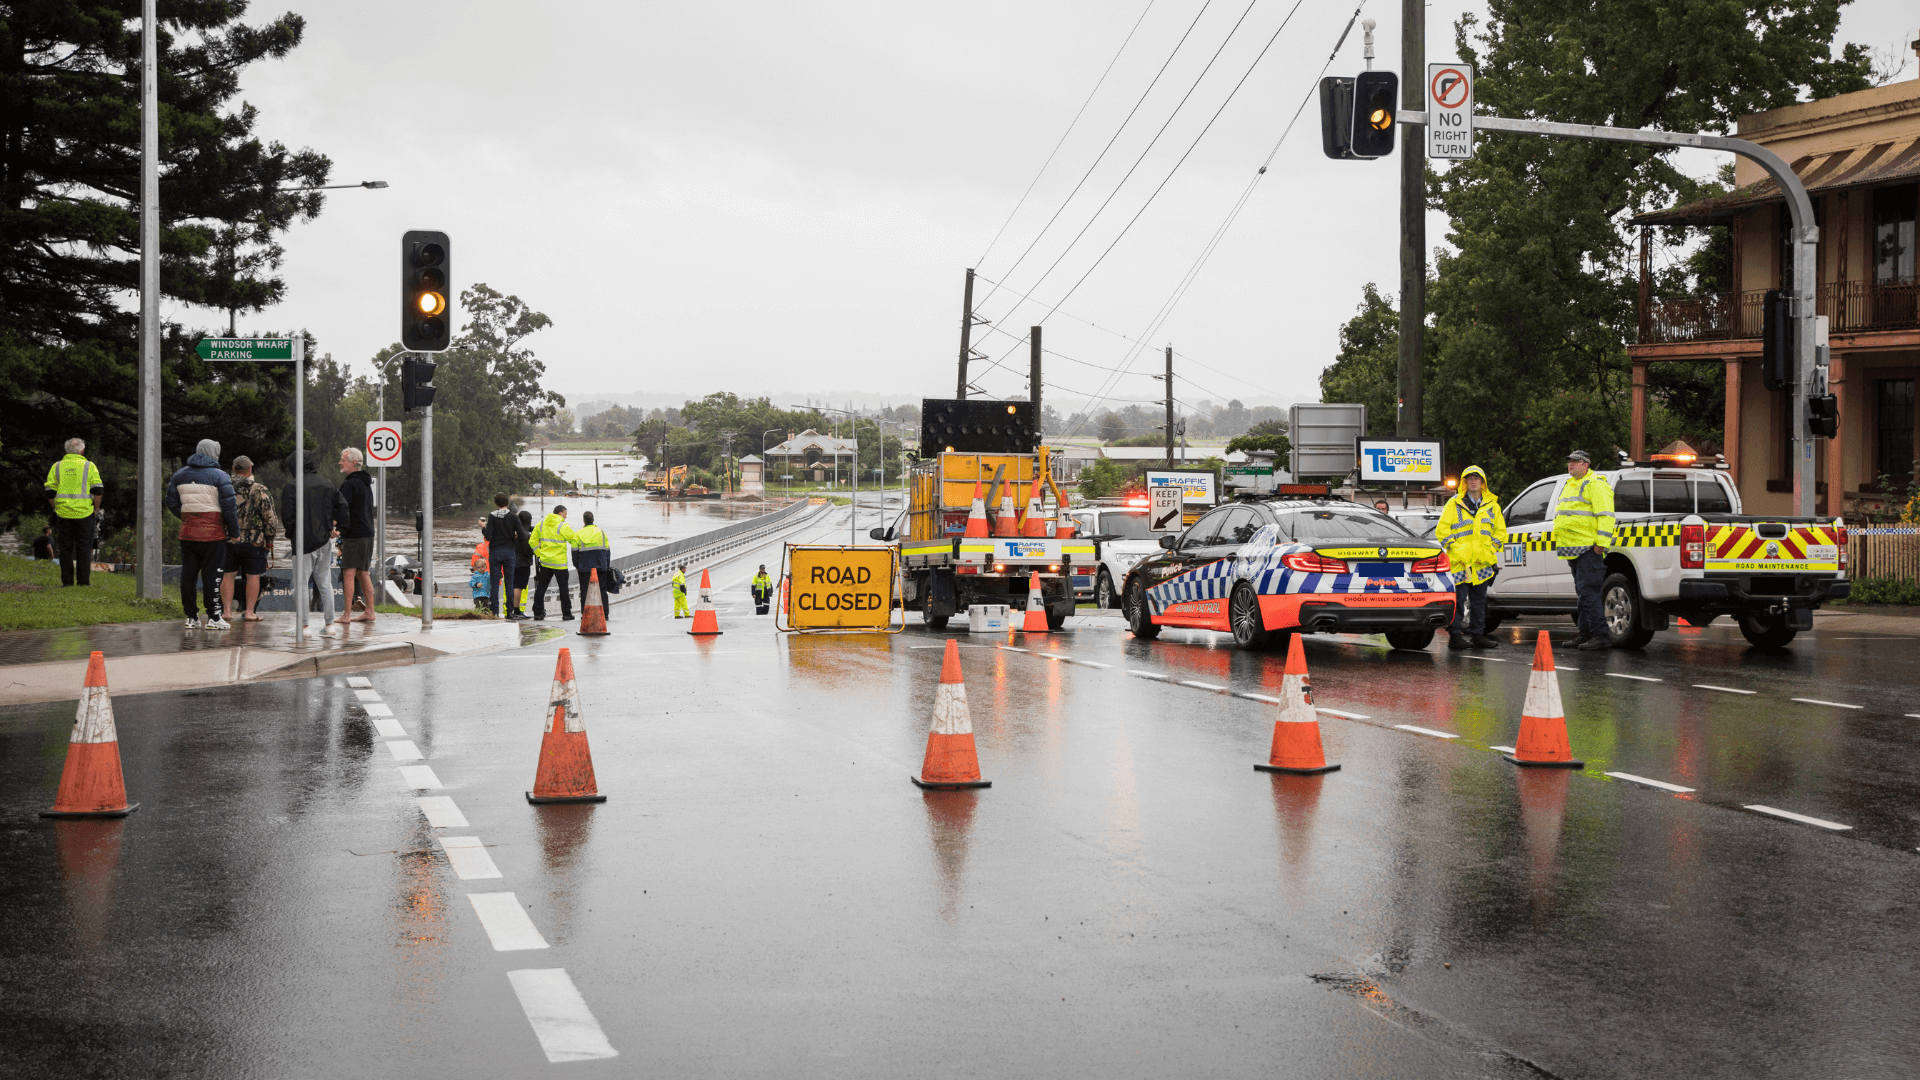 Emergency services close off road for glooding